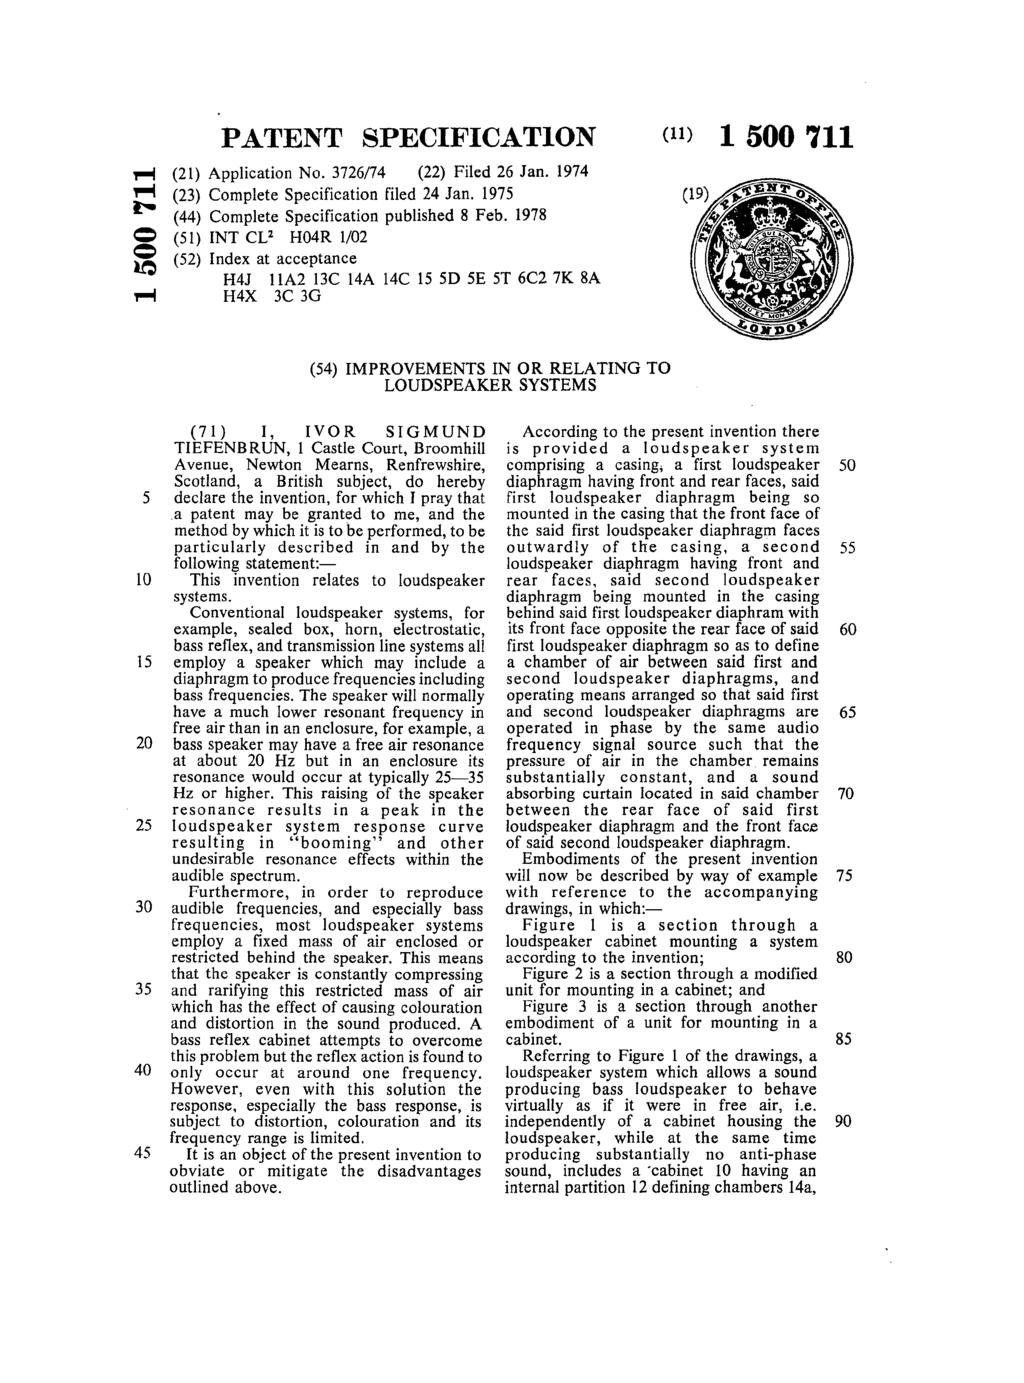 PATENT SPECIFICATION (21) Application No. 3726174 (22) Filed 26 Jan. 1974 (23) Complete Specification filed 24 Jan. 1975 (44) Complete Specification published 8 Feb.